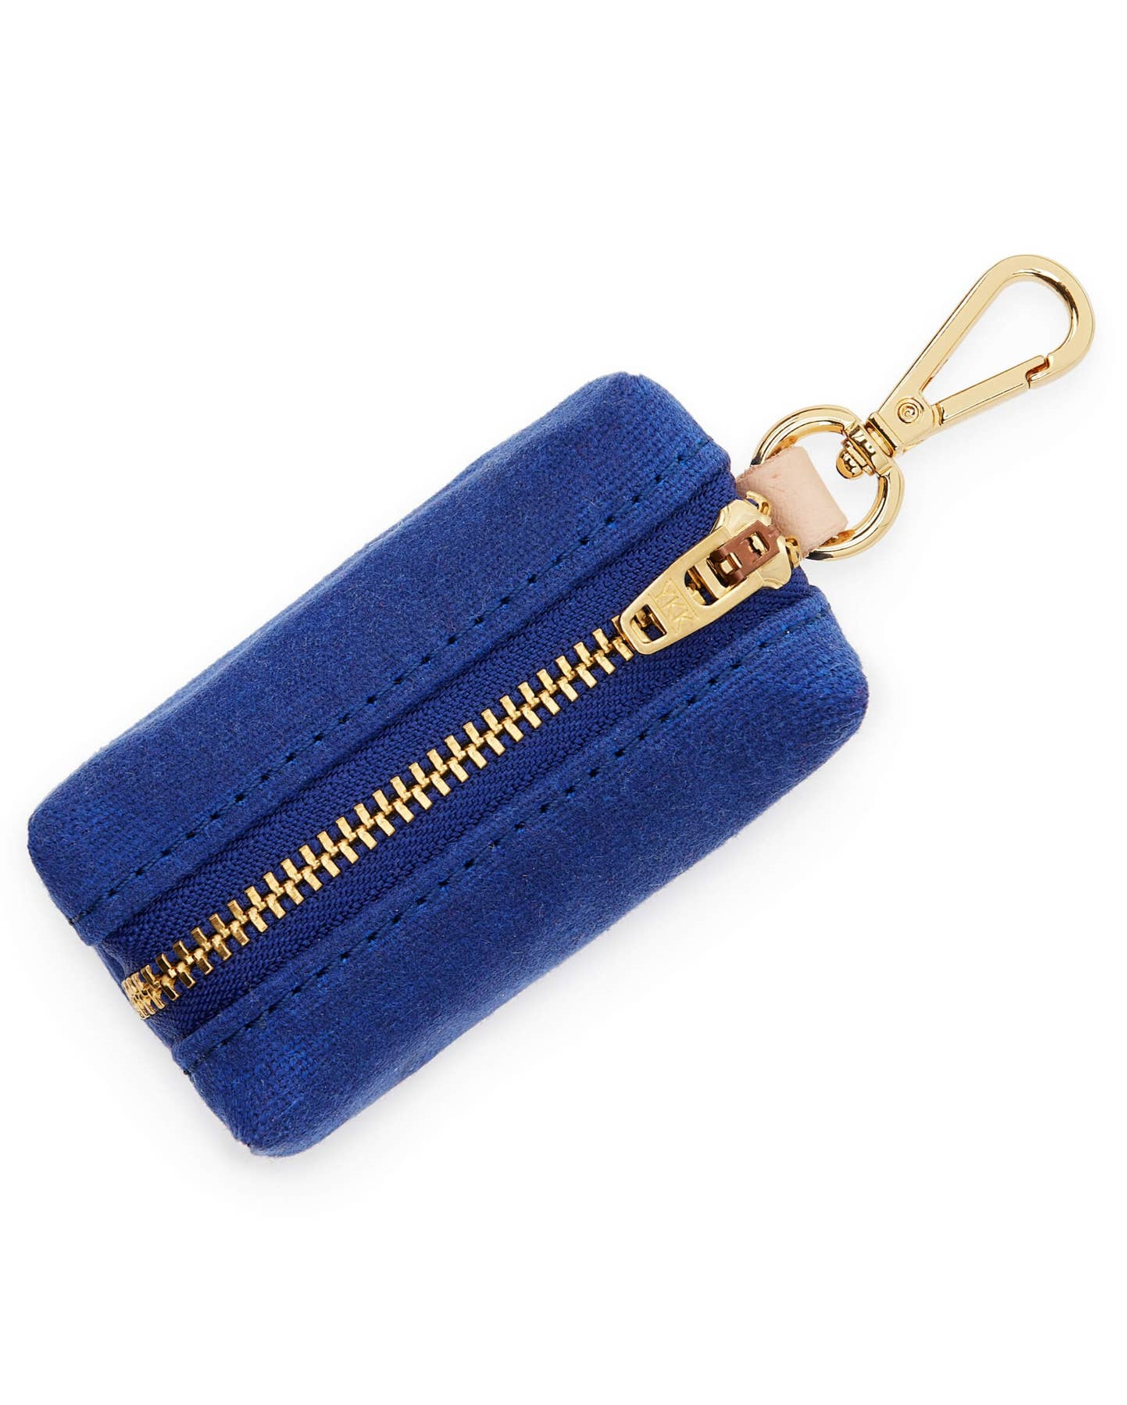 Waxed blue cotton canvas is complete with elevated brass hardware. Sleek clasp easily attaches to your leash's O ring. There's no mess left behind with this adorable accessory.